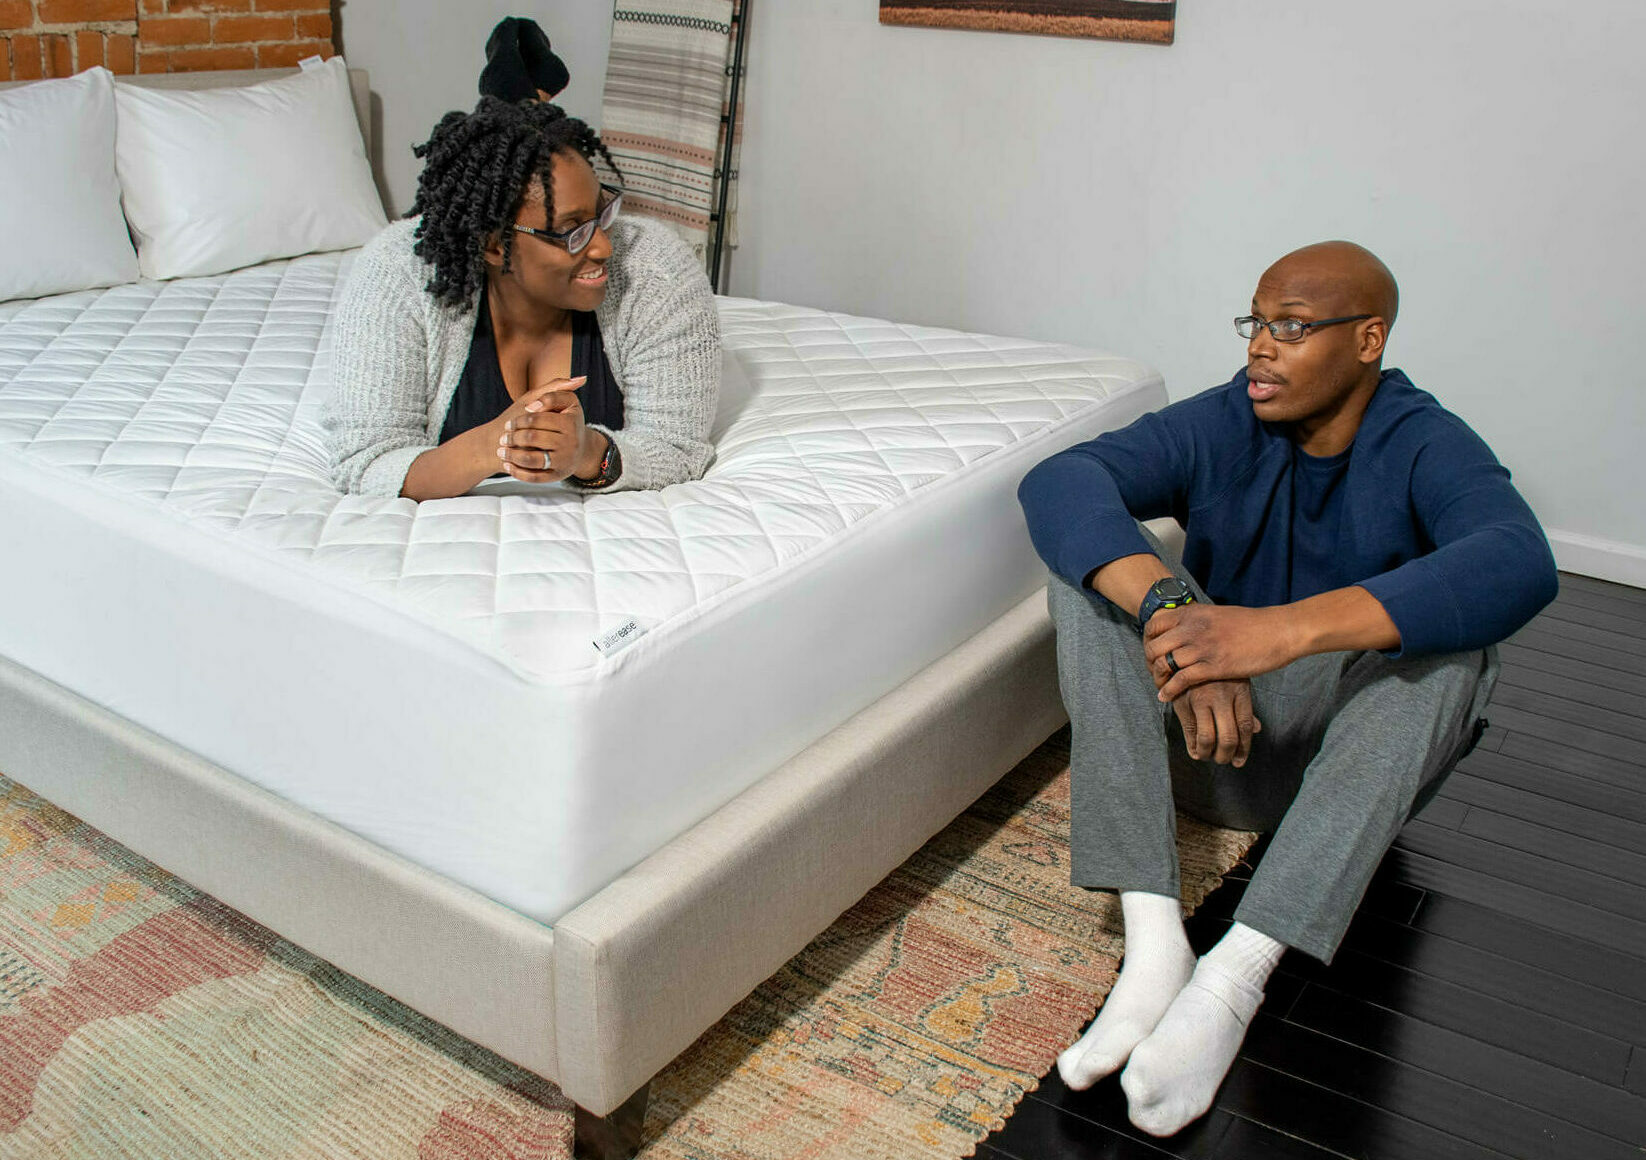 A woman on her bed talking to a man sitting on the floor.